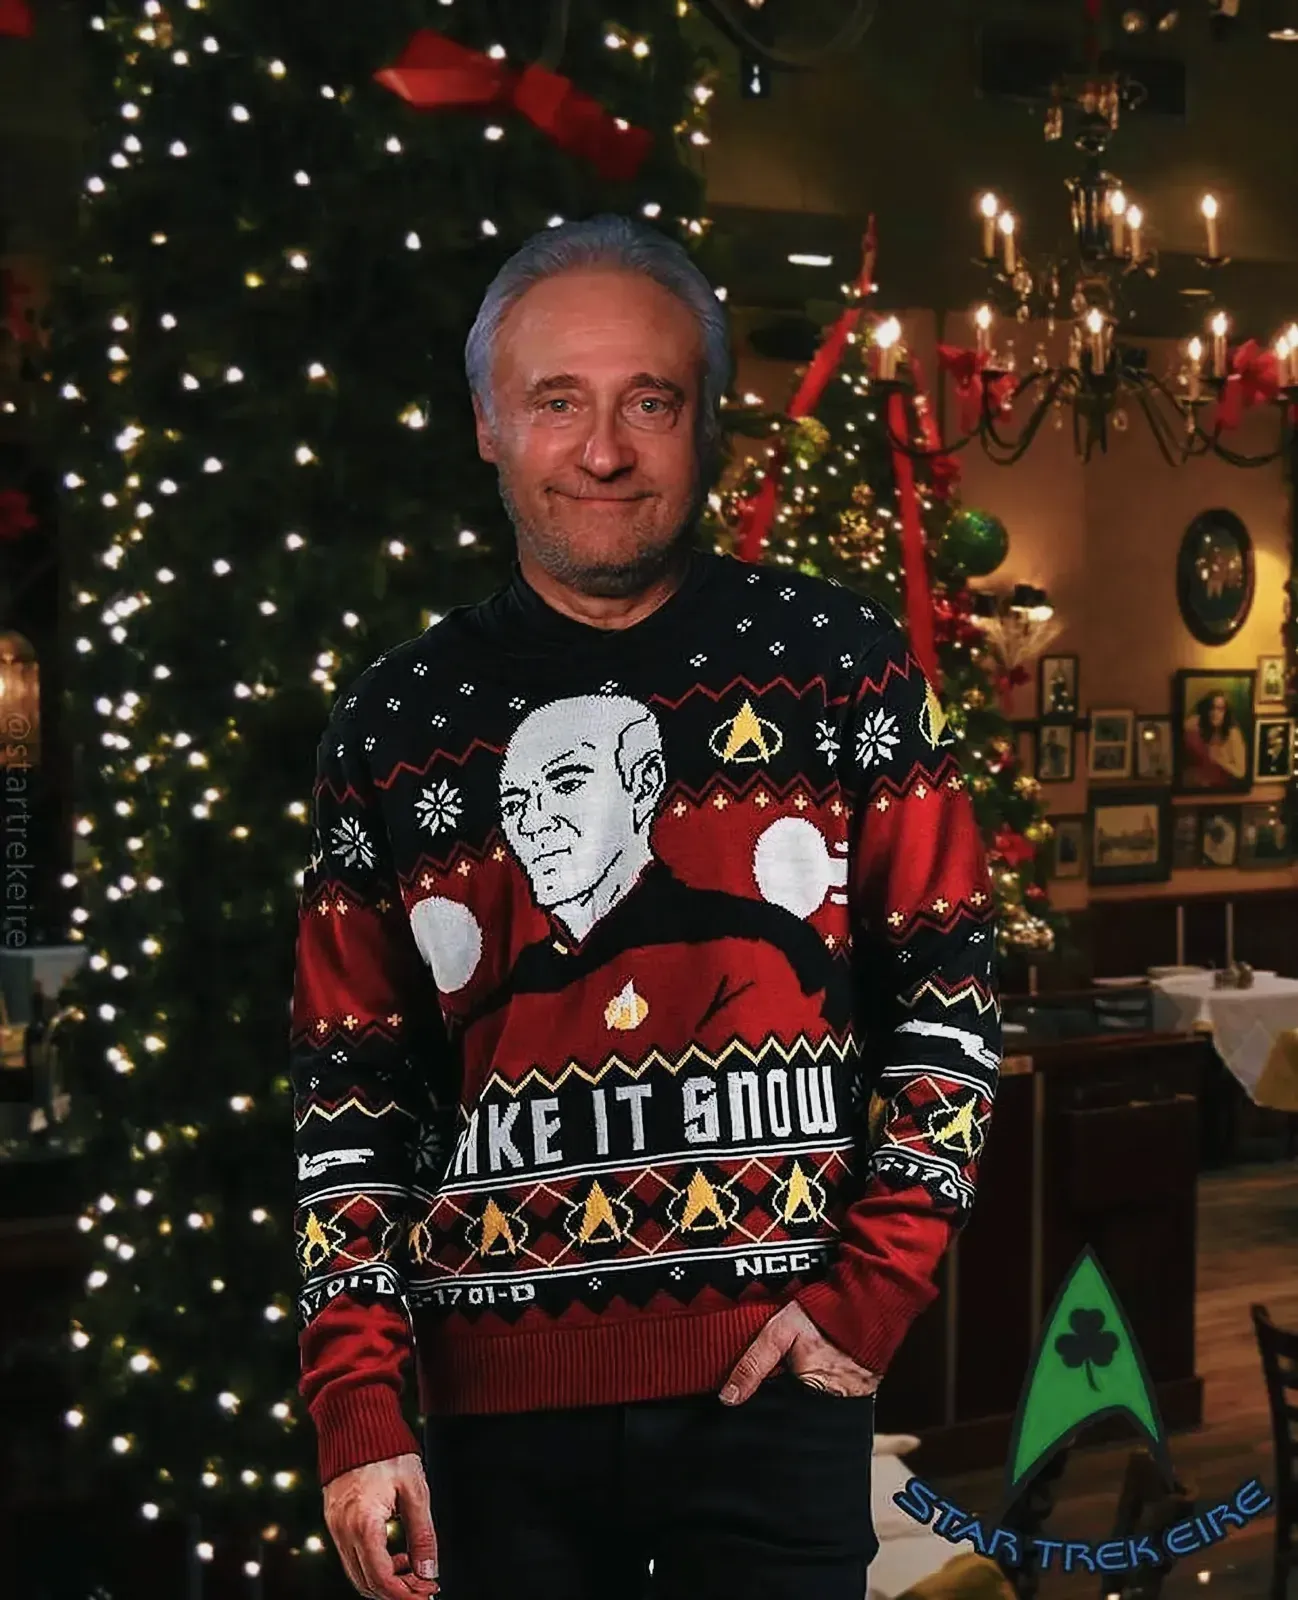 Man wearing a festive Christmas sweater adorned with traditional holiday elements.